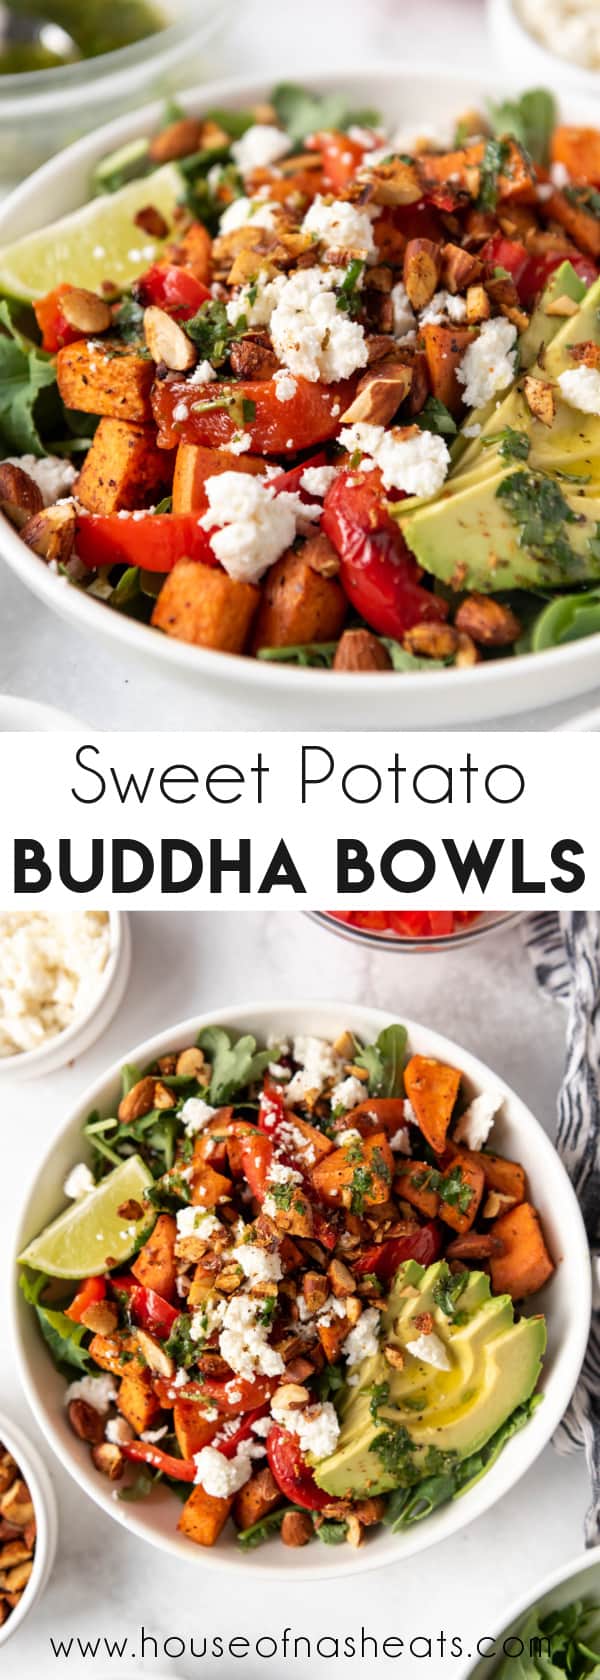 A collage of images of buddha bowls with text overlay.